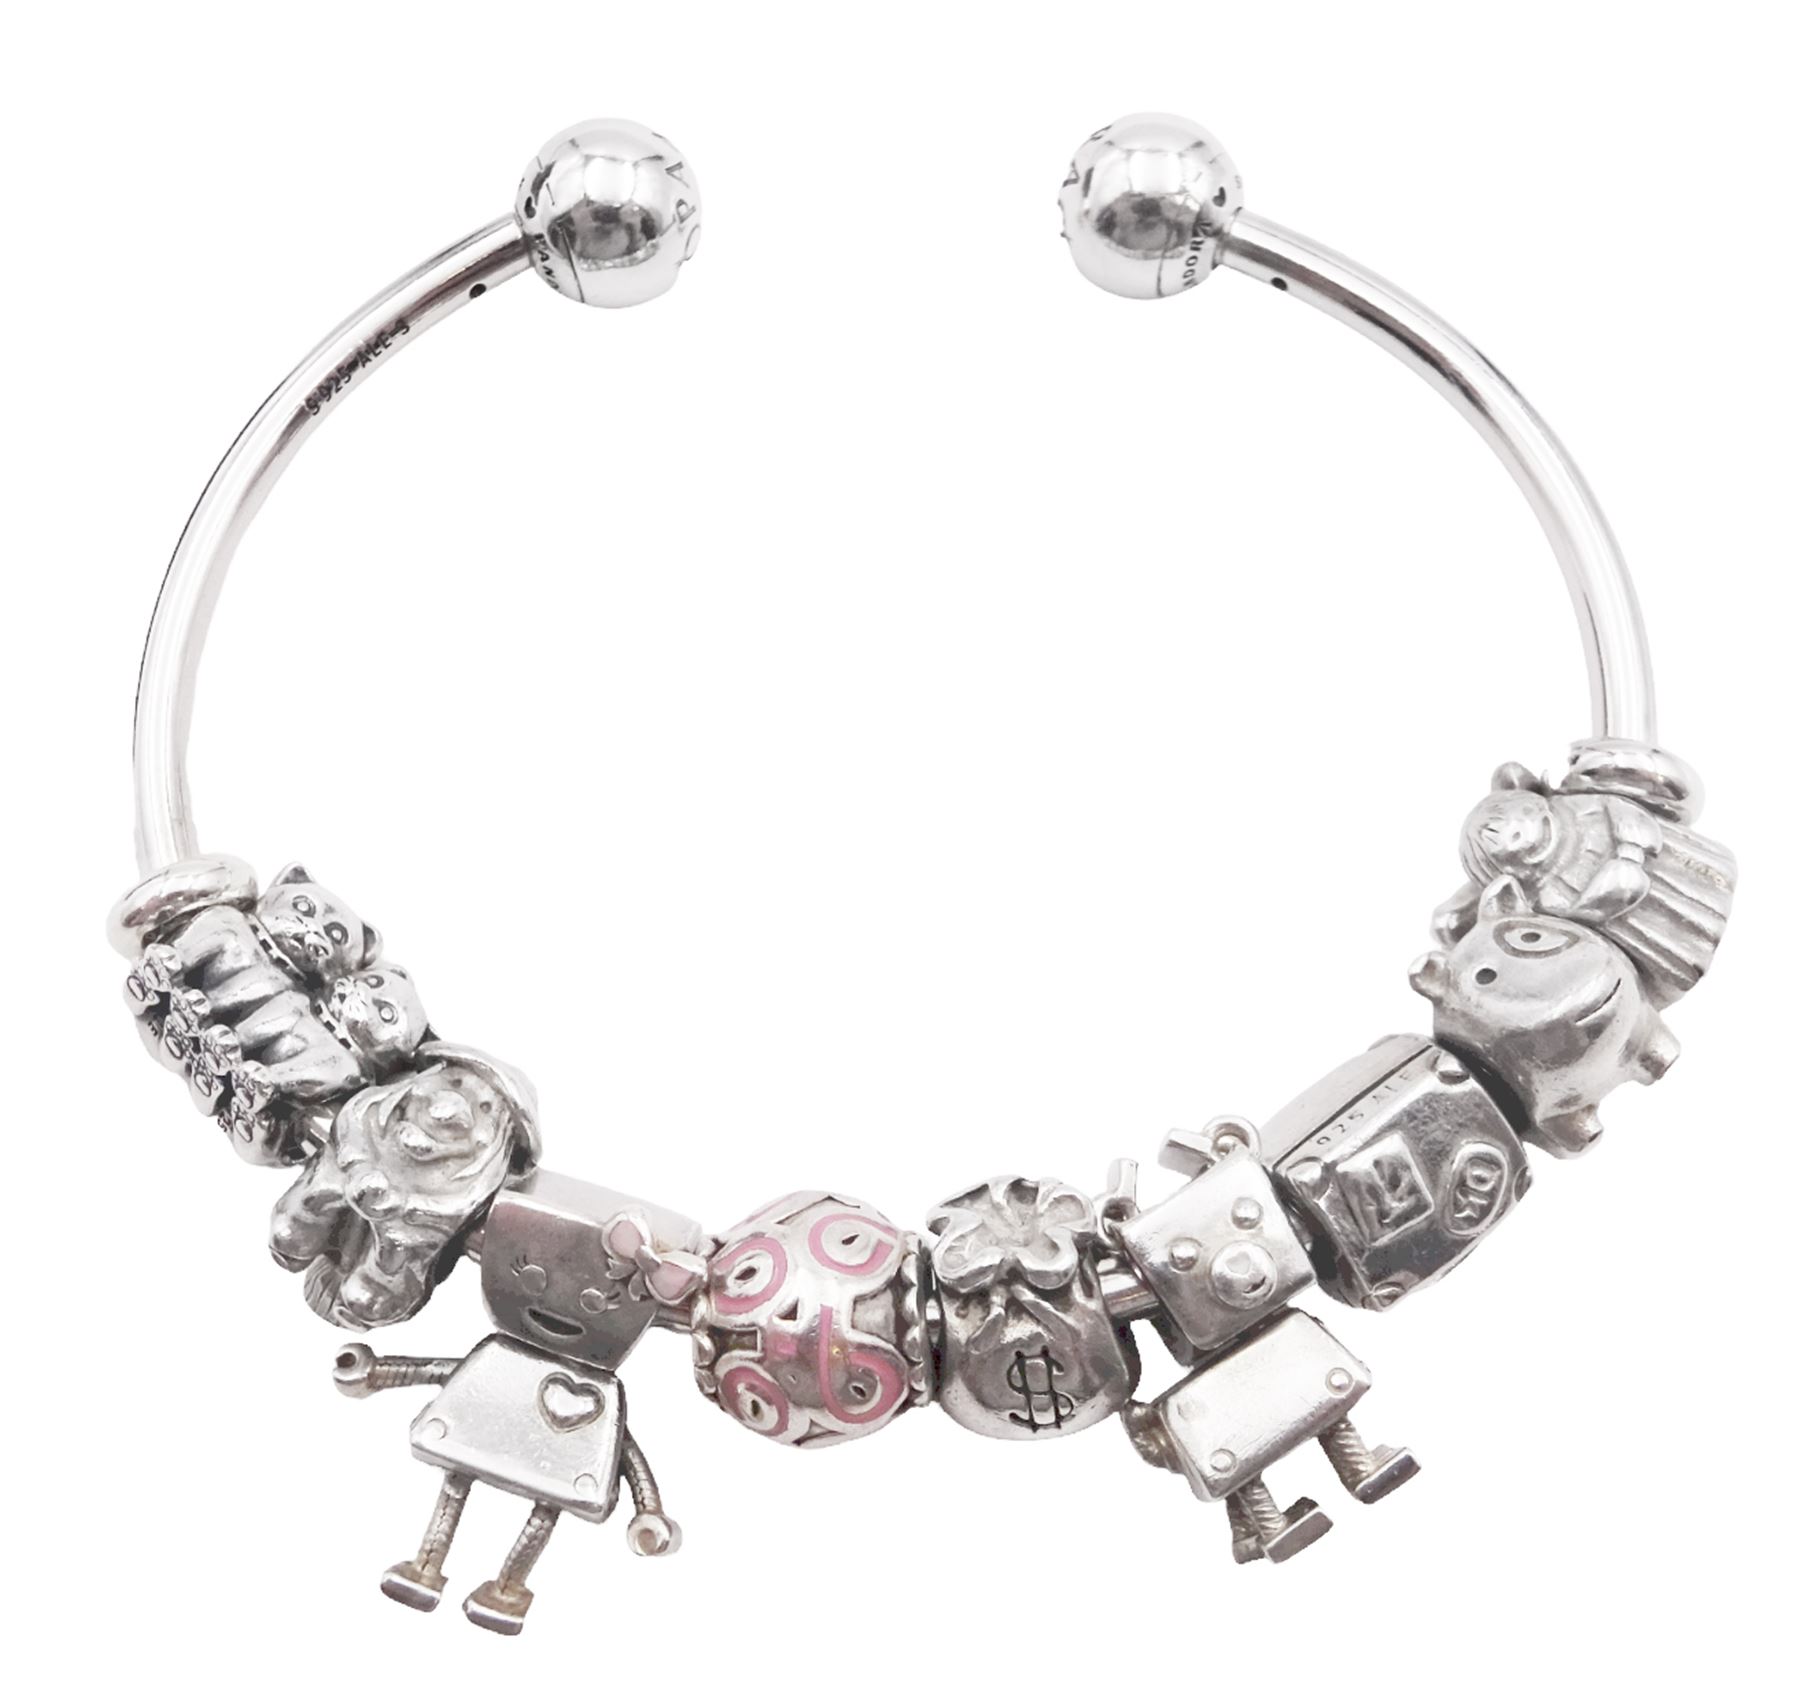 Pandora silver open bangle bracelet with nine silver Pandora charms and two stoppers